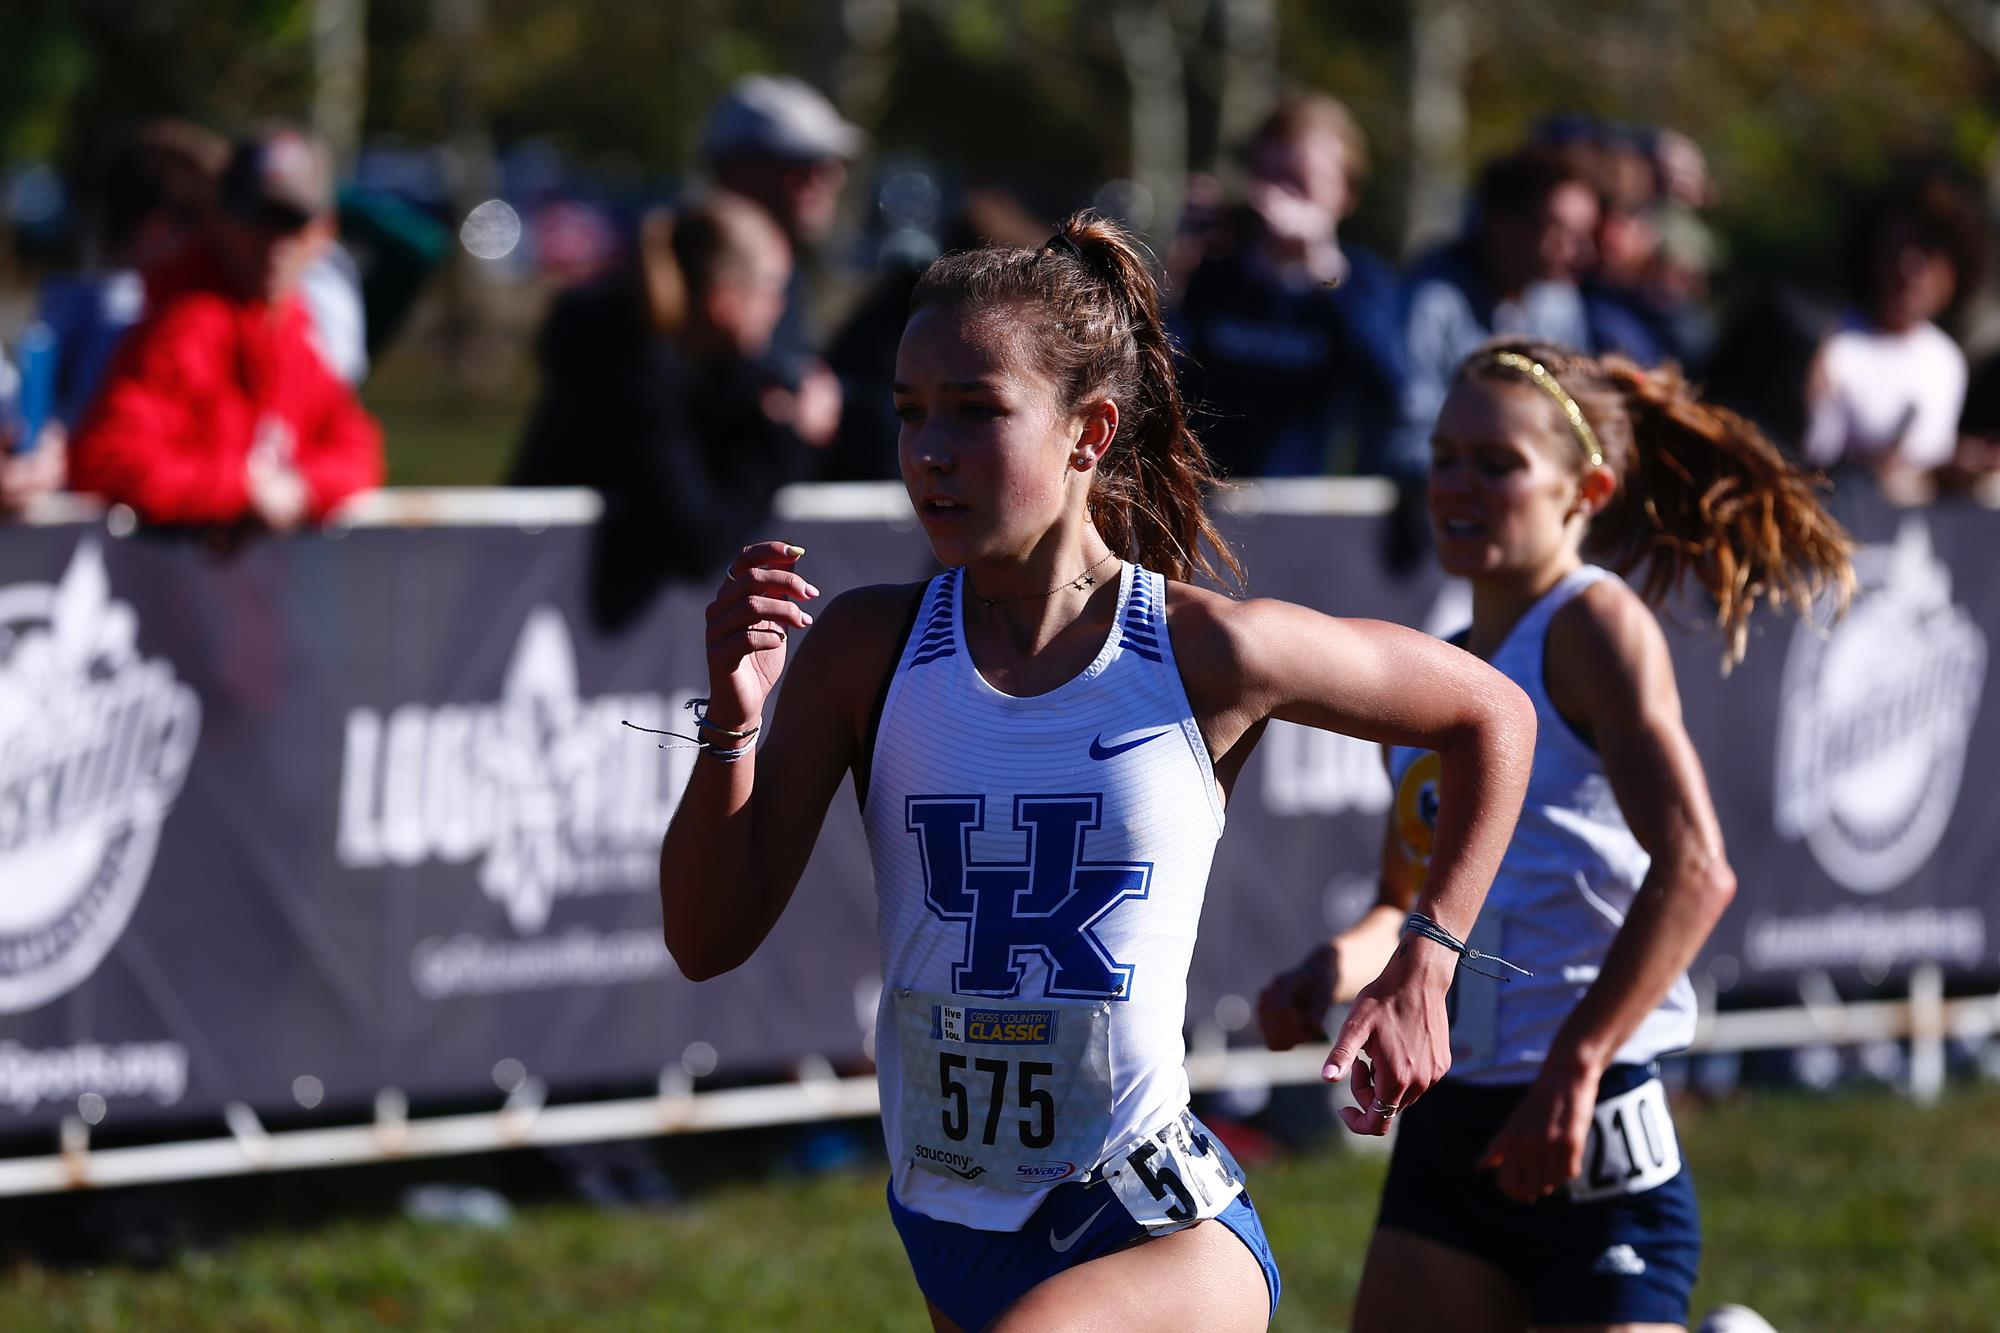 Kentucky Cross Country Finishes 20th and 22nd at Greater Louisville Classic